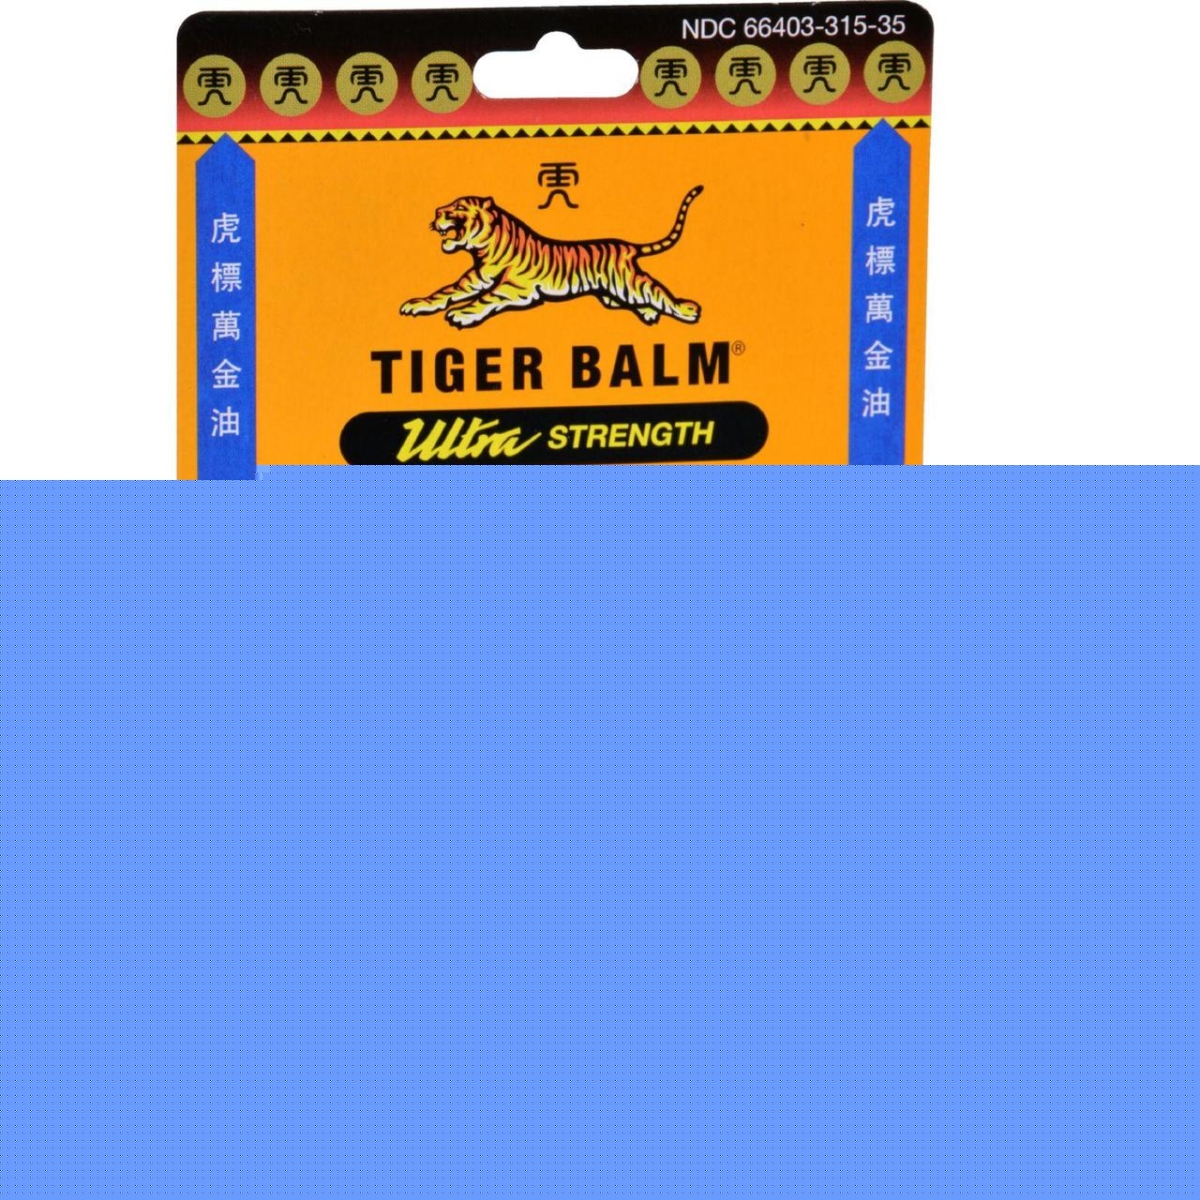 Hg0876615 0.63 Oz Pain Relief Ointment - Case Of 6